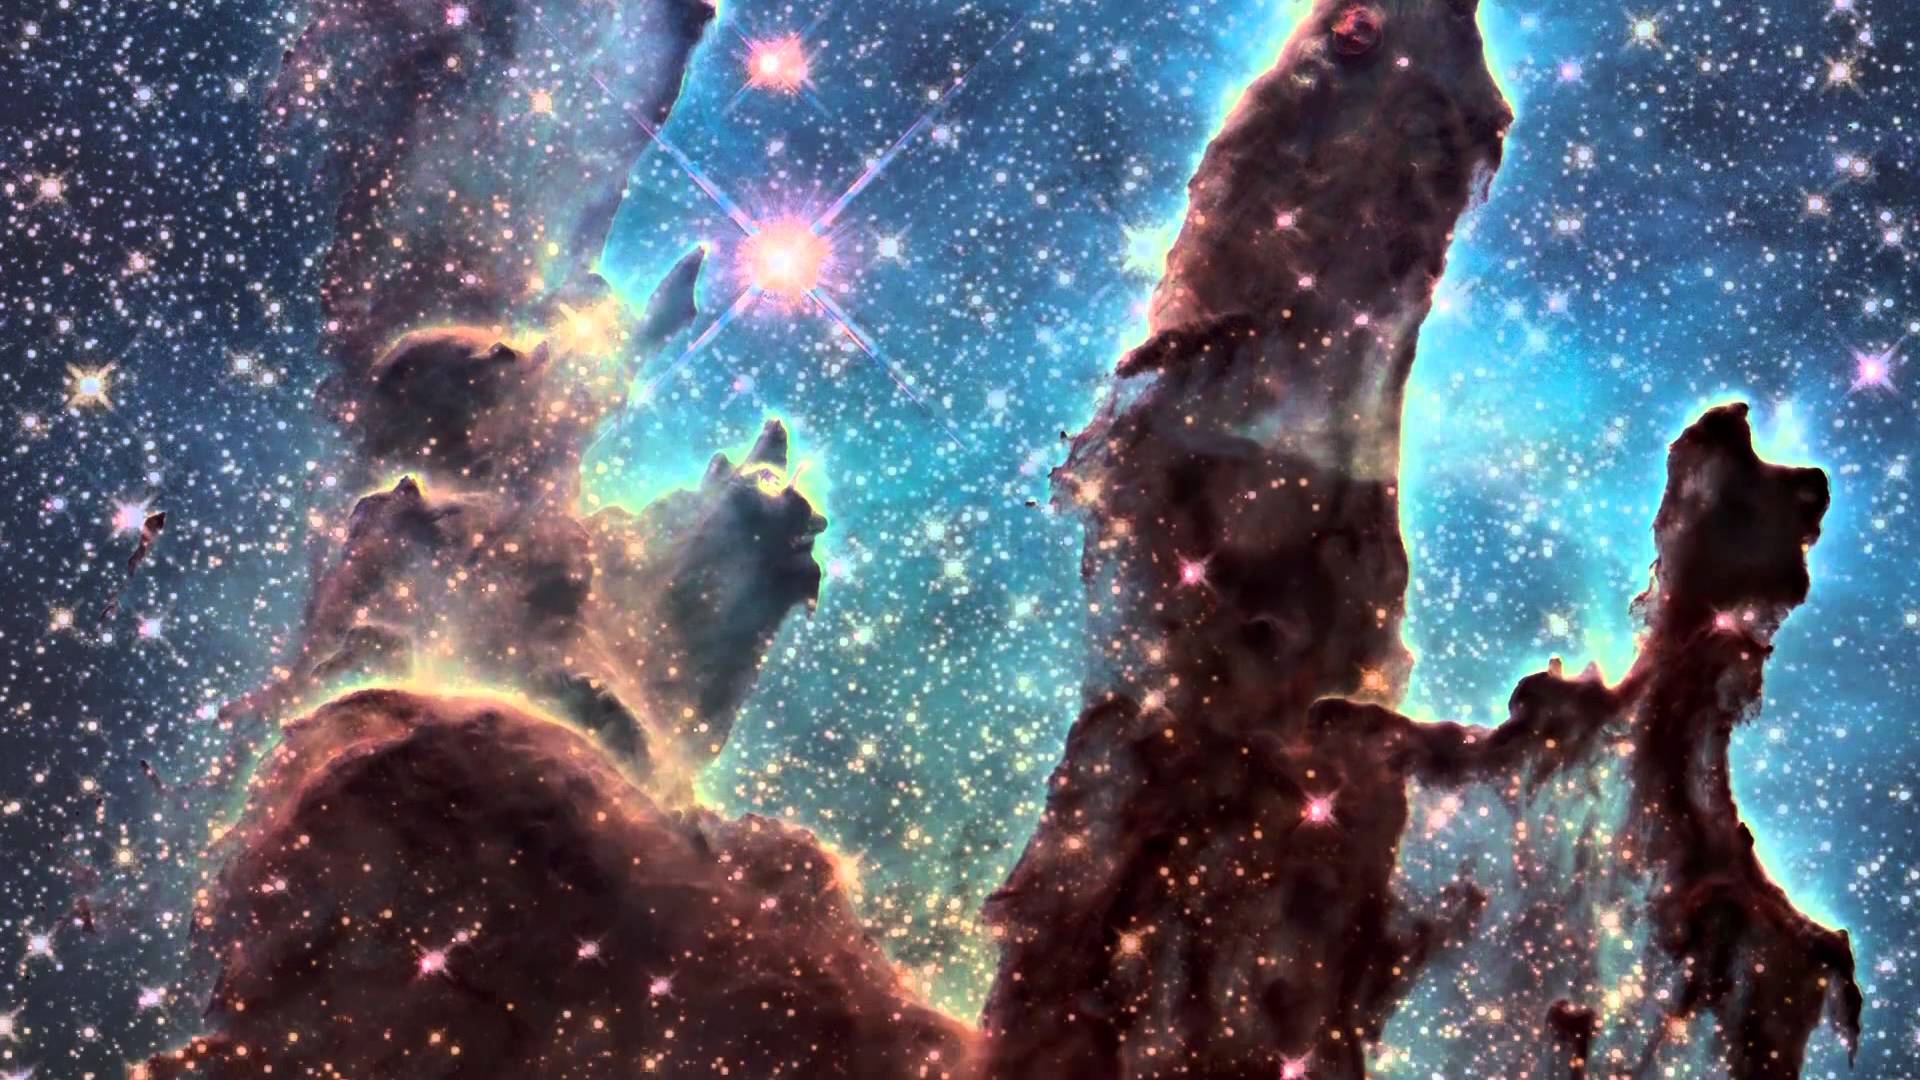 Quot Pillars Of Creation Iconic Image From Hubble